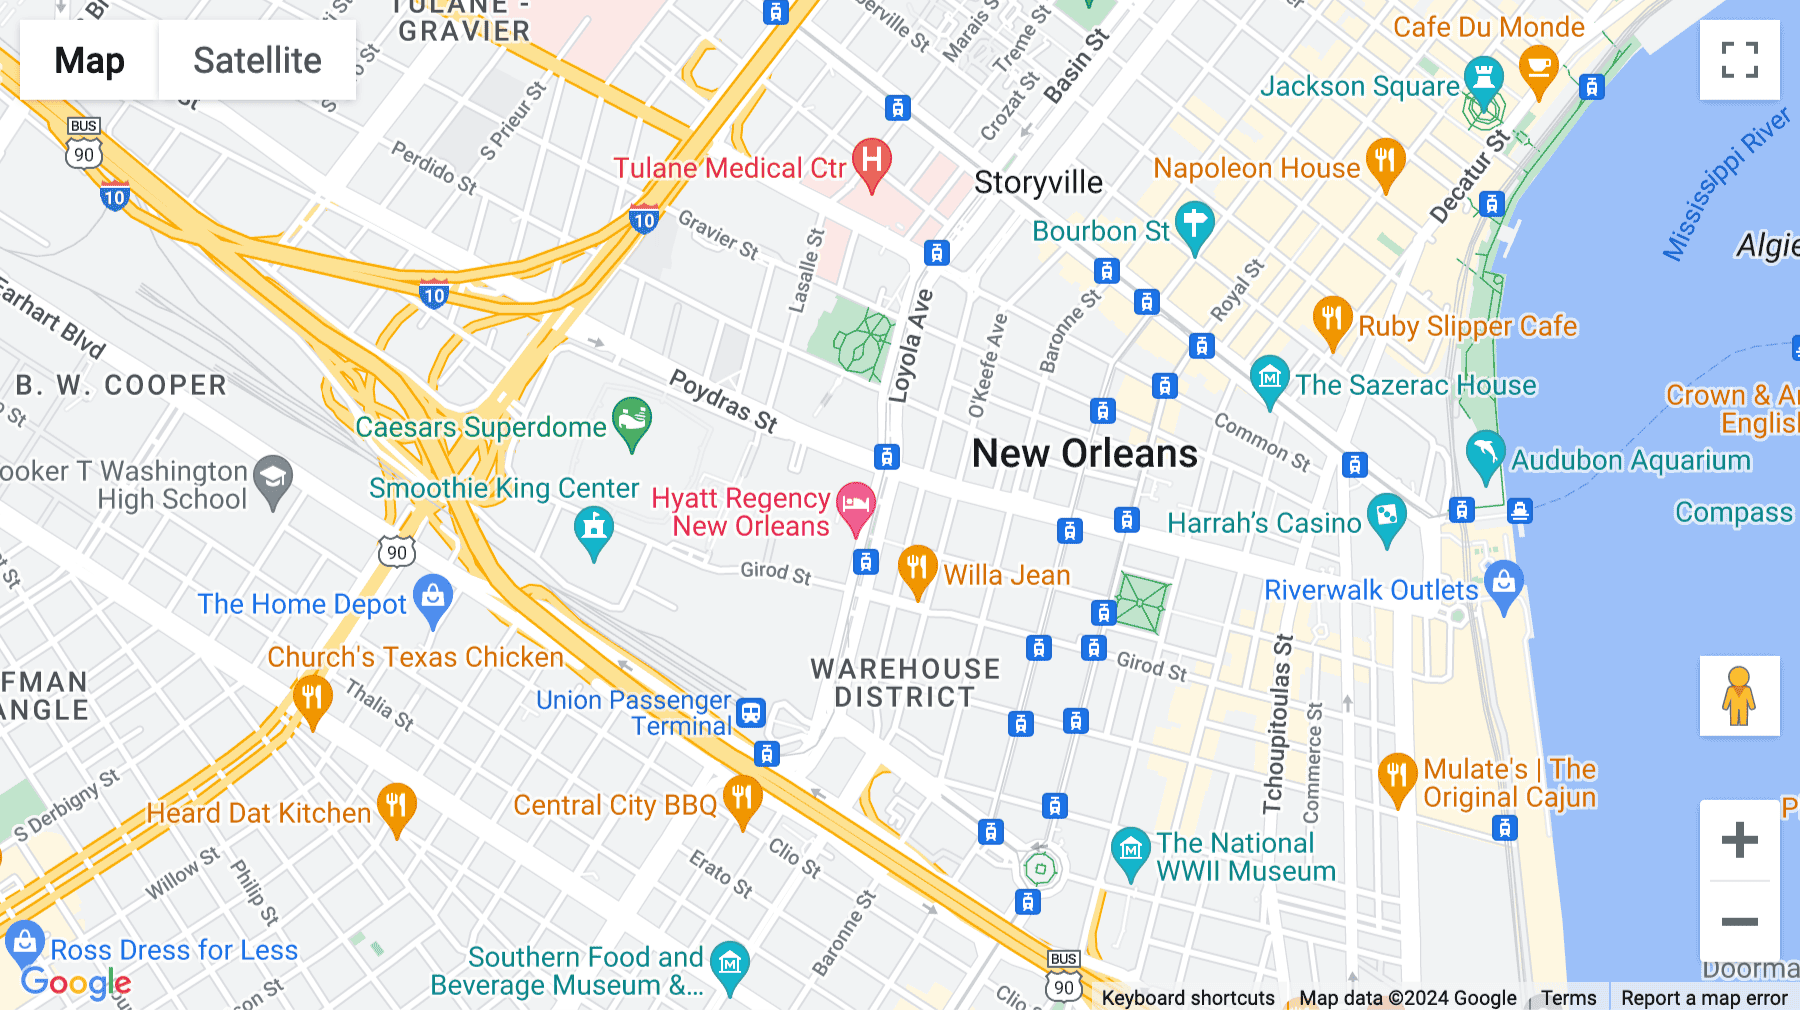 Click for interative map of 1100 Poydras Street, Suite 2900, Energy Centre Building, New Orleans